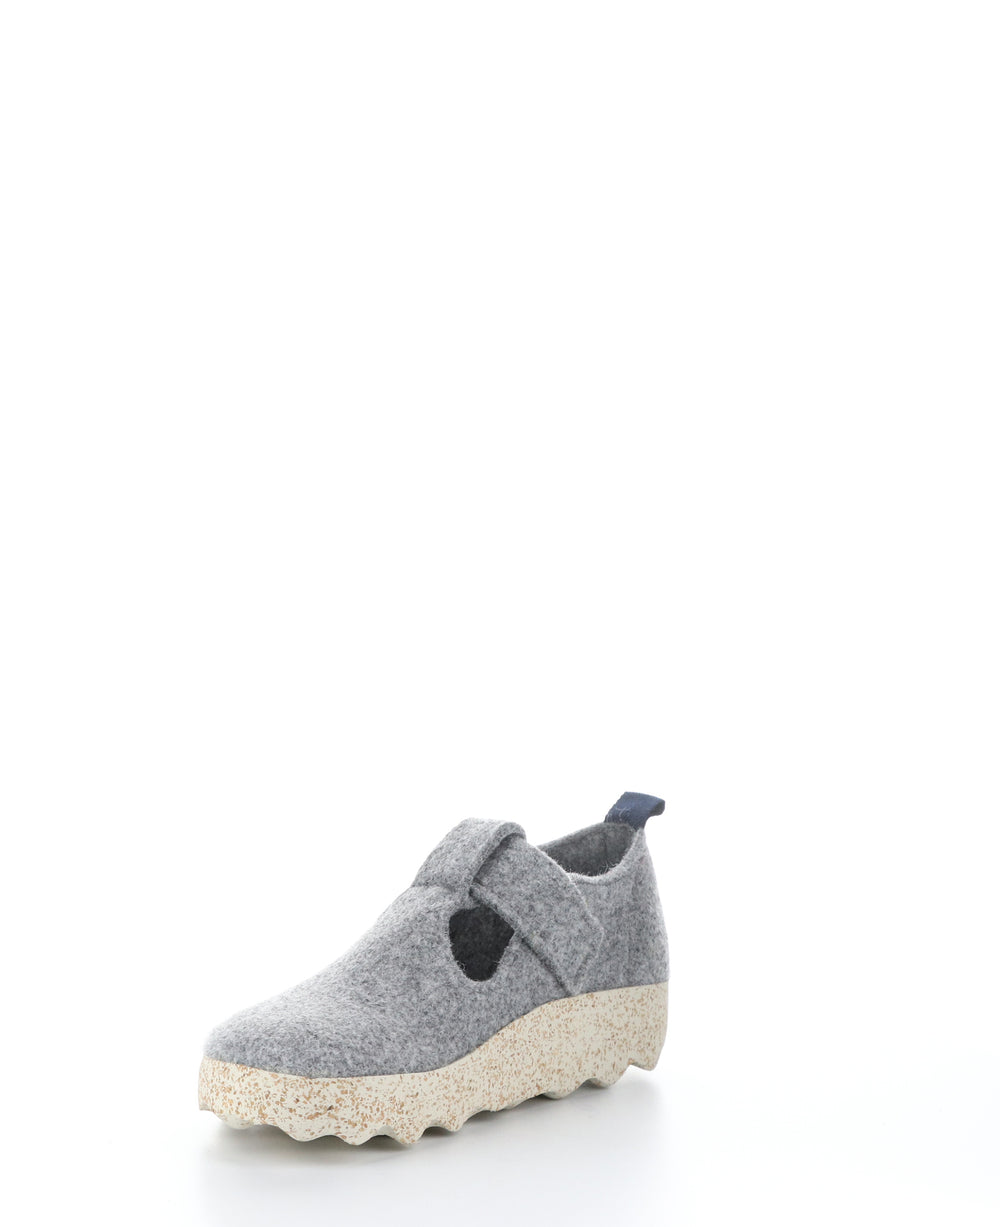 CATE085ASP Concrete Round Toe Shoes|CATE085ASP Chaussures à Bout Rond in Gris